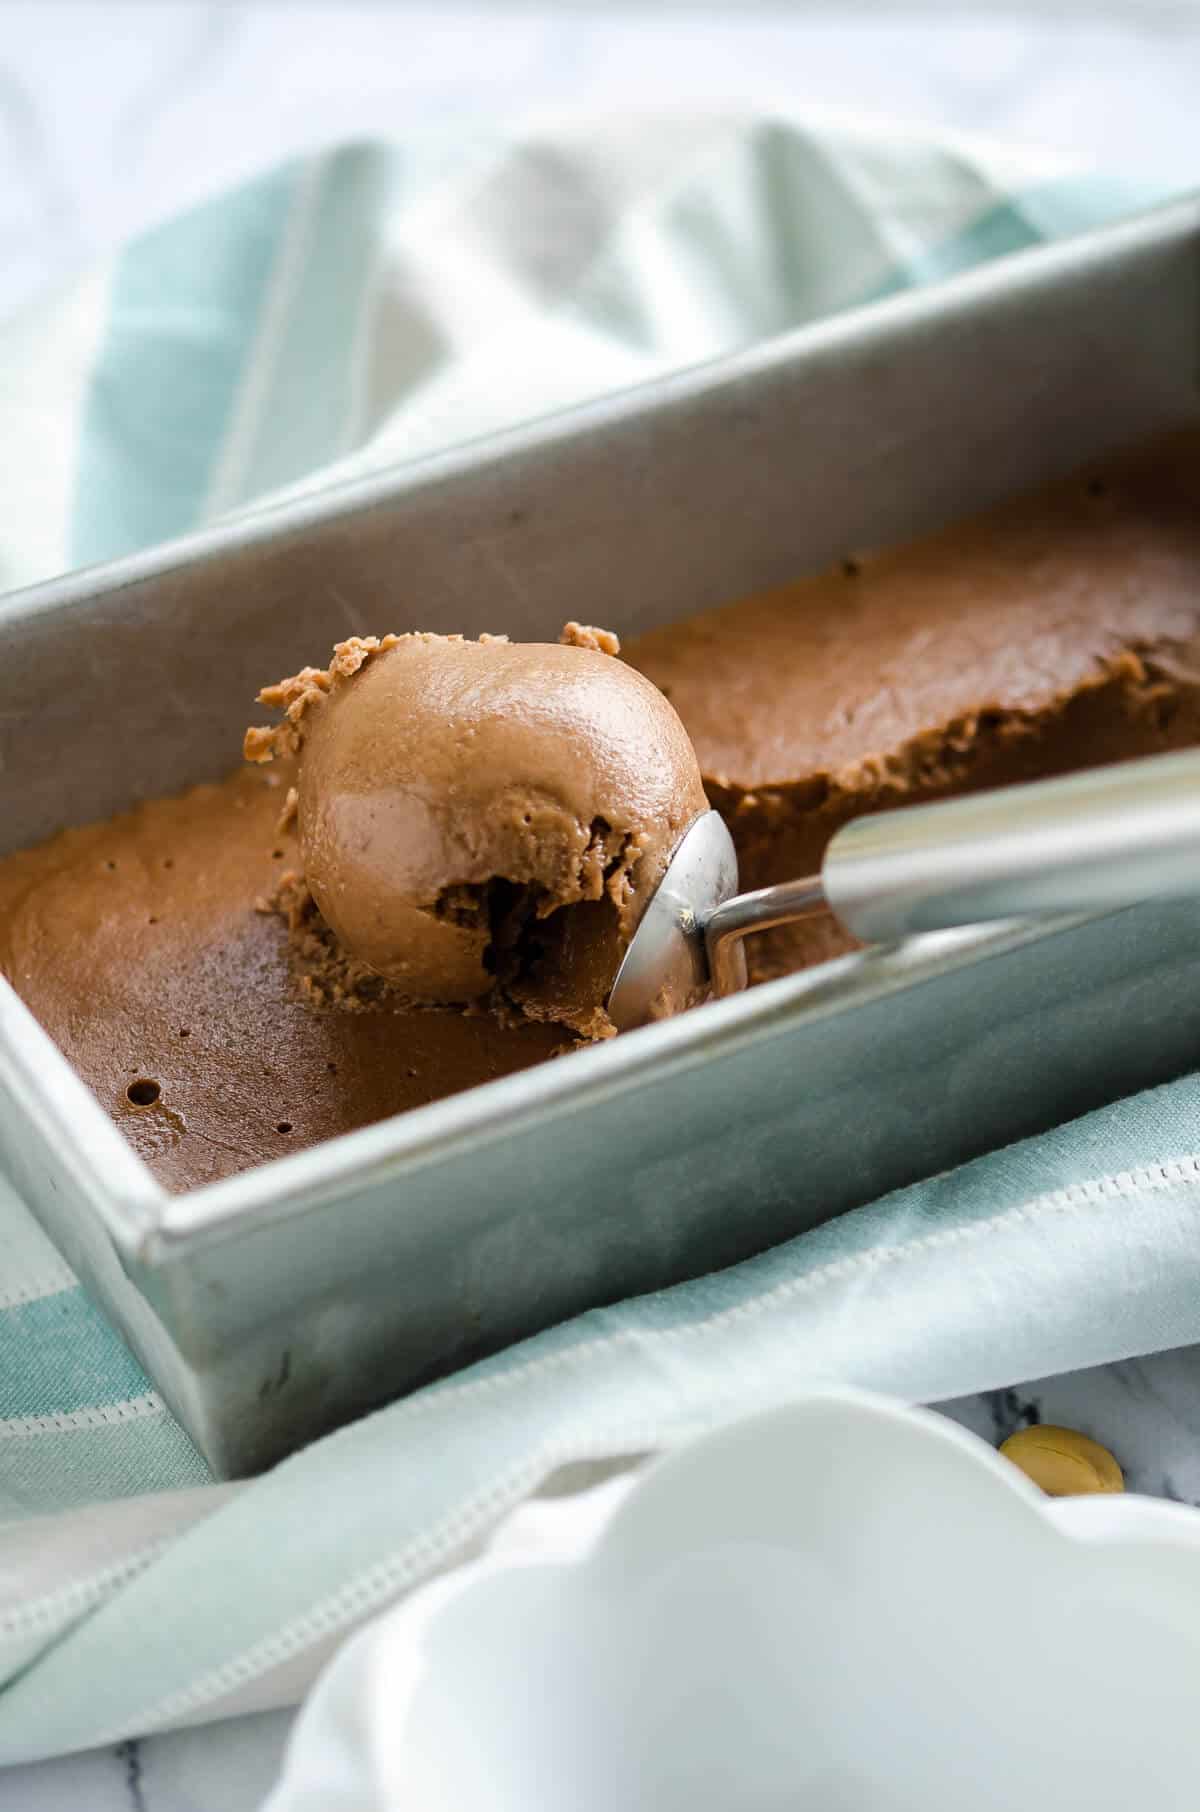 ice cream scoop scooping out 4 ingredient chocolate peanut butter banana ice cream out of a loaf pan.